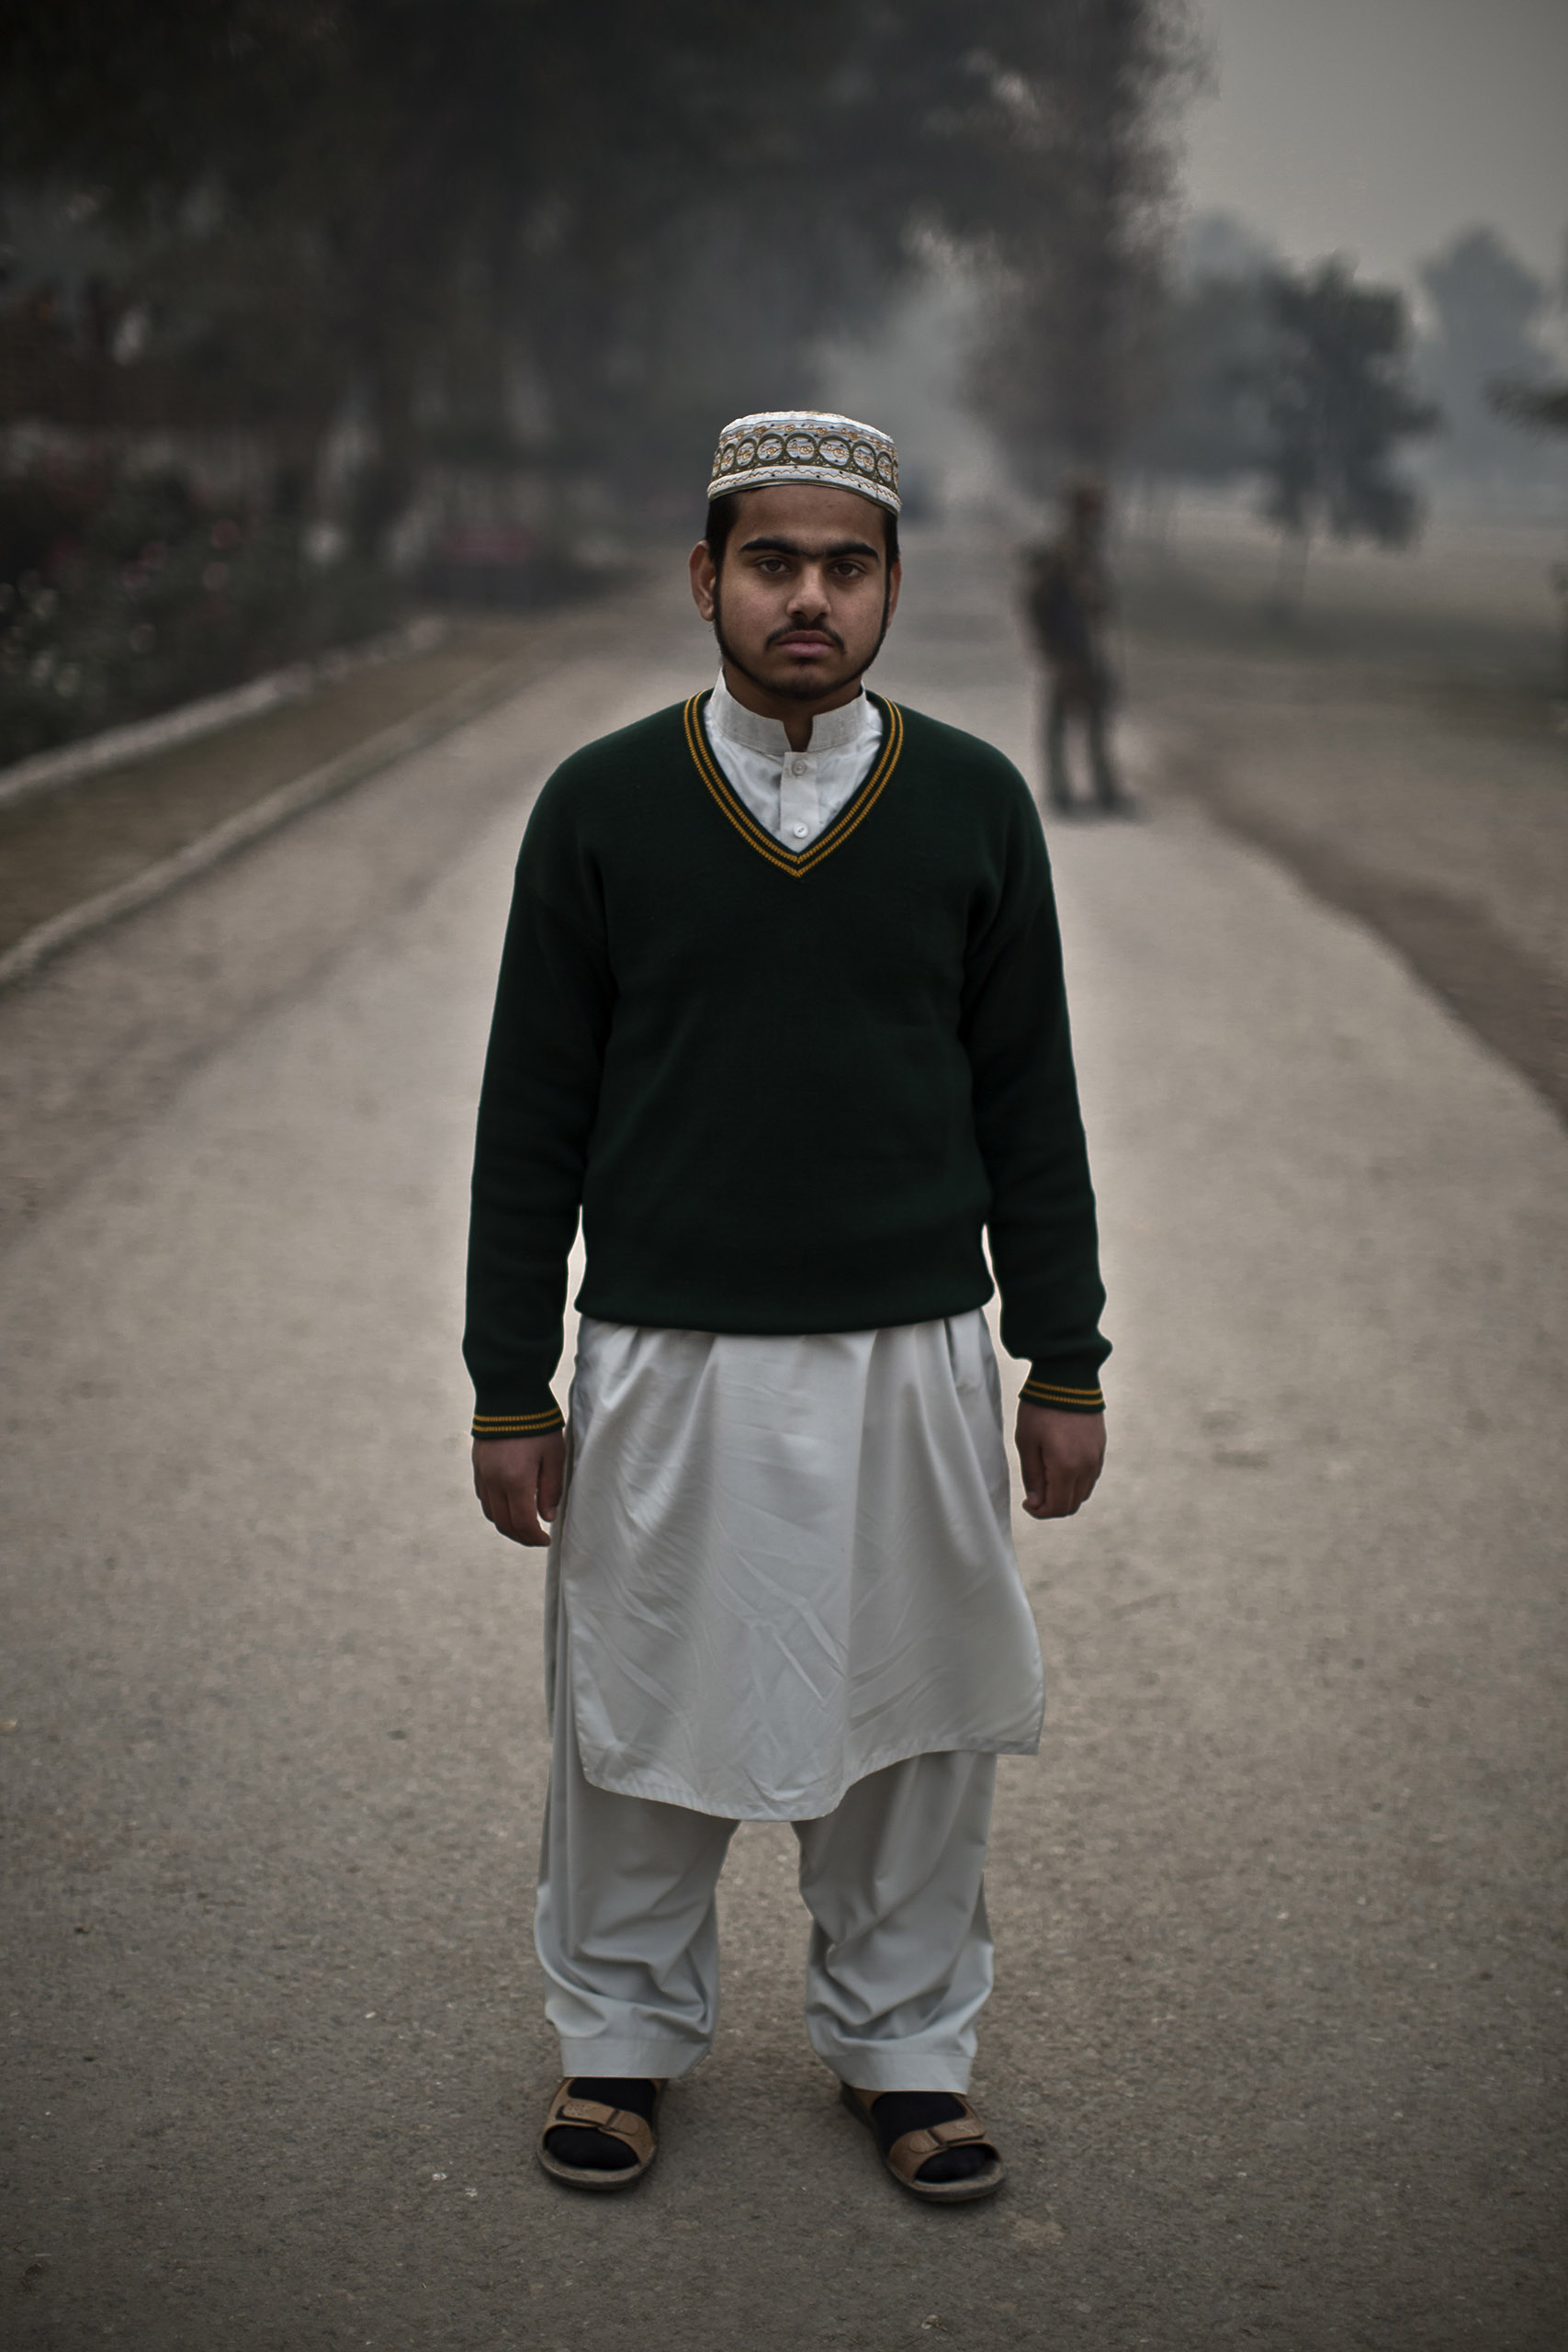 Mohammad Tufail Mumtaz, 14, a student who survived the Pakistani Taliban's attack on the Army Public School on Dec. 16, in the school's yard. Peshawar, Pakistan. Dec. 21, 2014.
                              
                               I was totally covered with bodies over me and around me as the shooting was from behind me,  Mohammad recalled from the scene in the auditorium.  I closed my eyes, I stopped my breathing and I lost track of time.